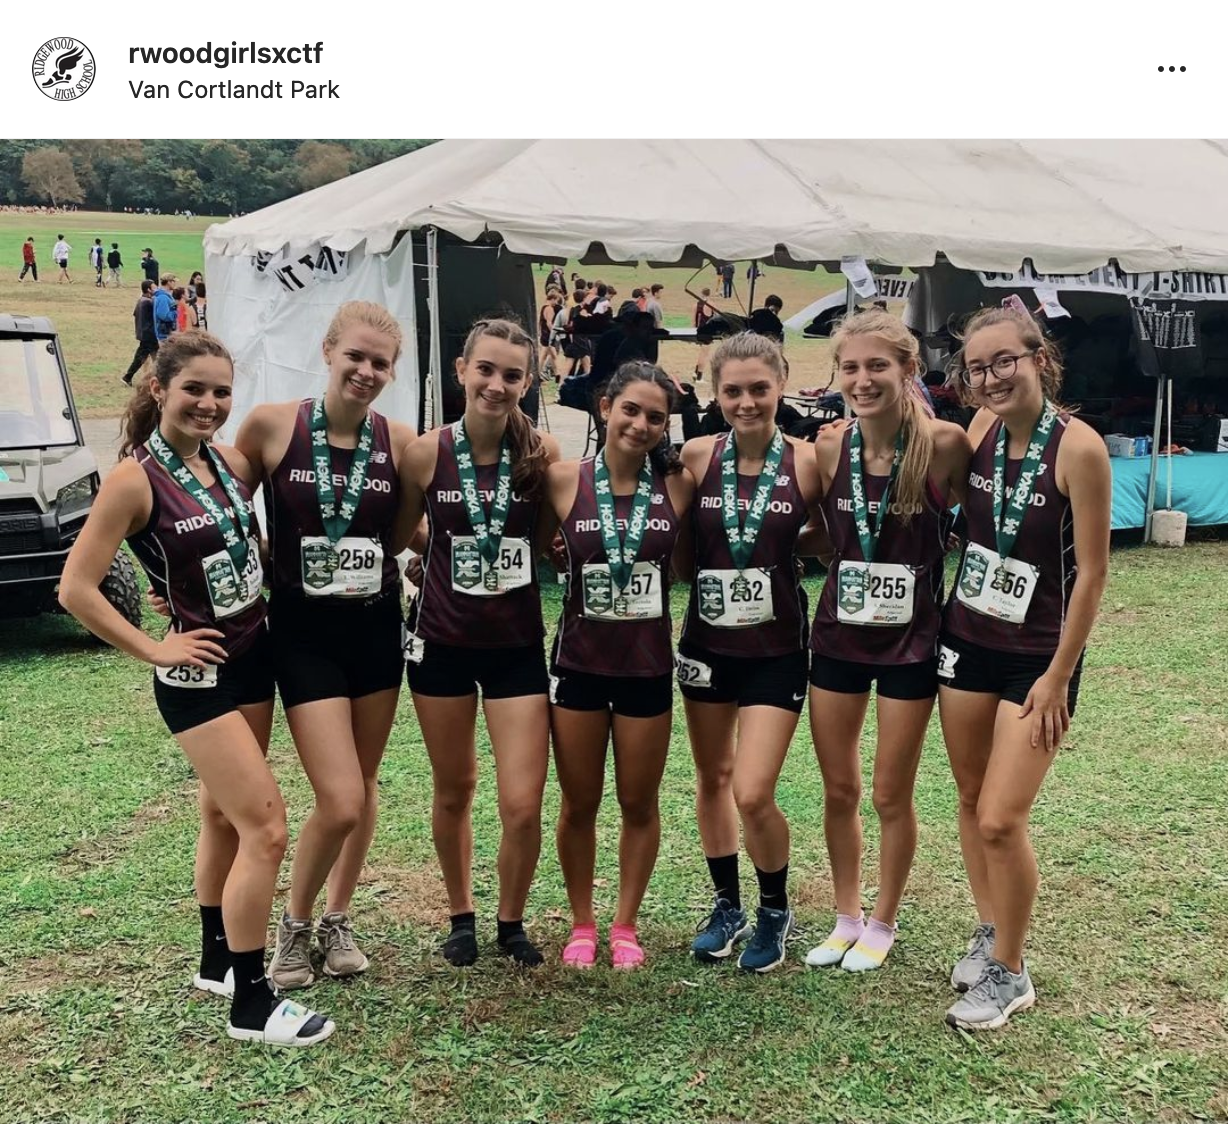 Girls’ 2021 Cross Country TeamManhattan Invitational with 5 girls in the top 22, an average of 15:49.6, and a compression of 42.2 seconds for the 2.5 mile race. The team got 2nd by just 4 points (57-61) in the Eastern Division. Ridgewood was the first team out of the northeast NXR division. Feeling super excited for the rest of the season!